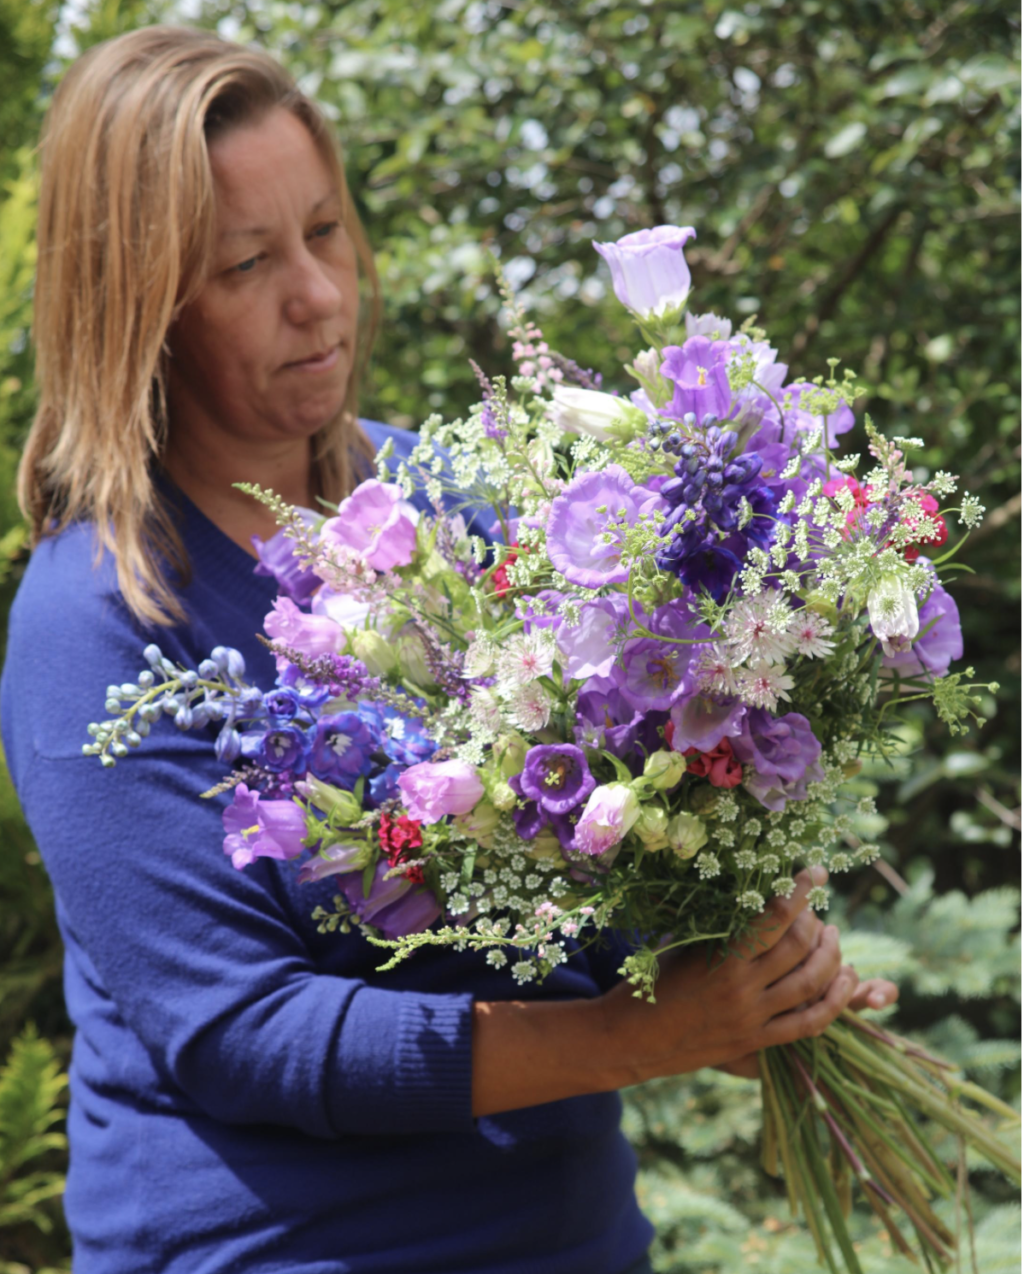 Debbie of Nature's Posy, Cambridgshire, holds an abundant meadow style bouquet filled with freshly cut British flowers from her flower farm. It's filled with the pretty purples of Canterbury Bells,starry pale pink astrantia, frothy white ammi majus and the stately blue spires of delphiniums.